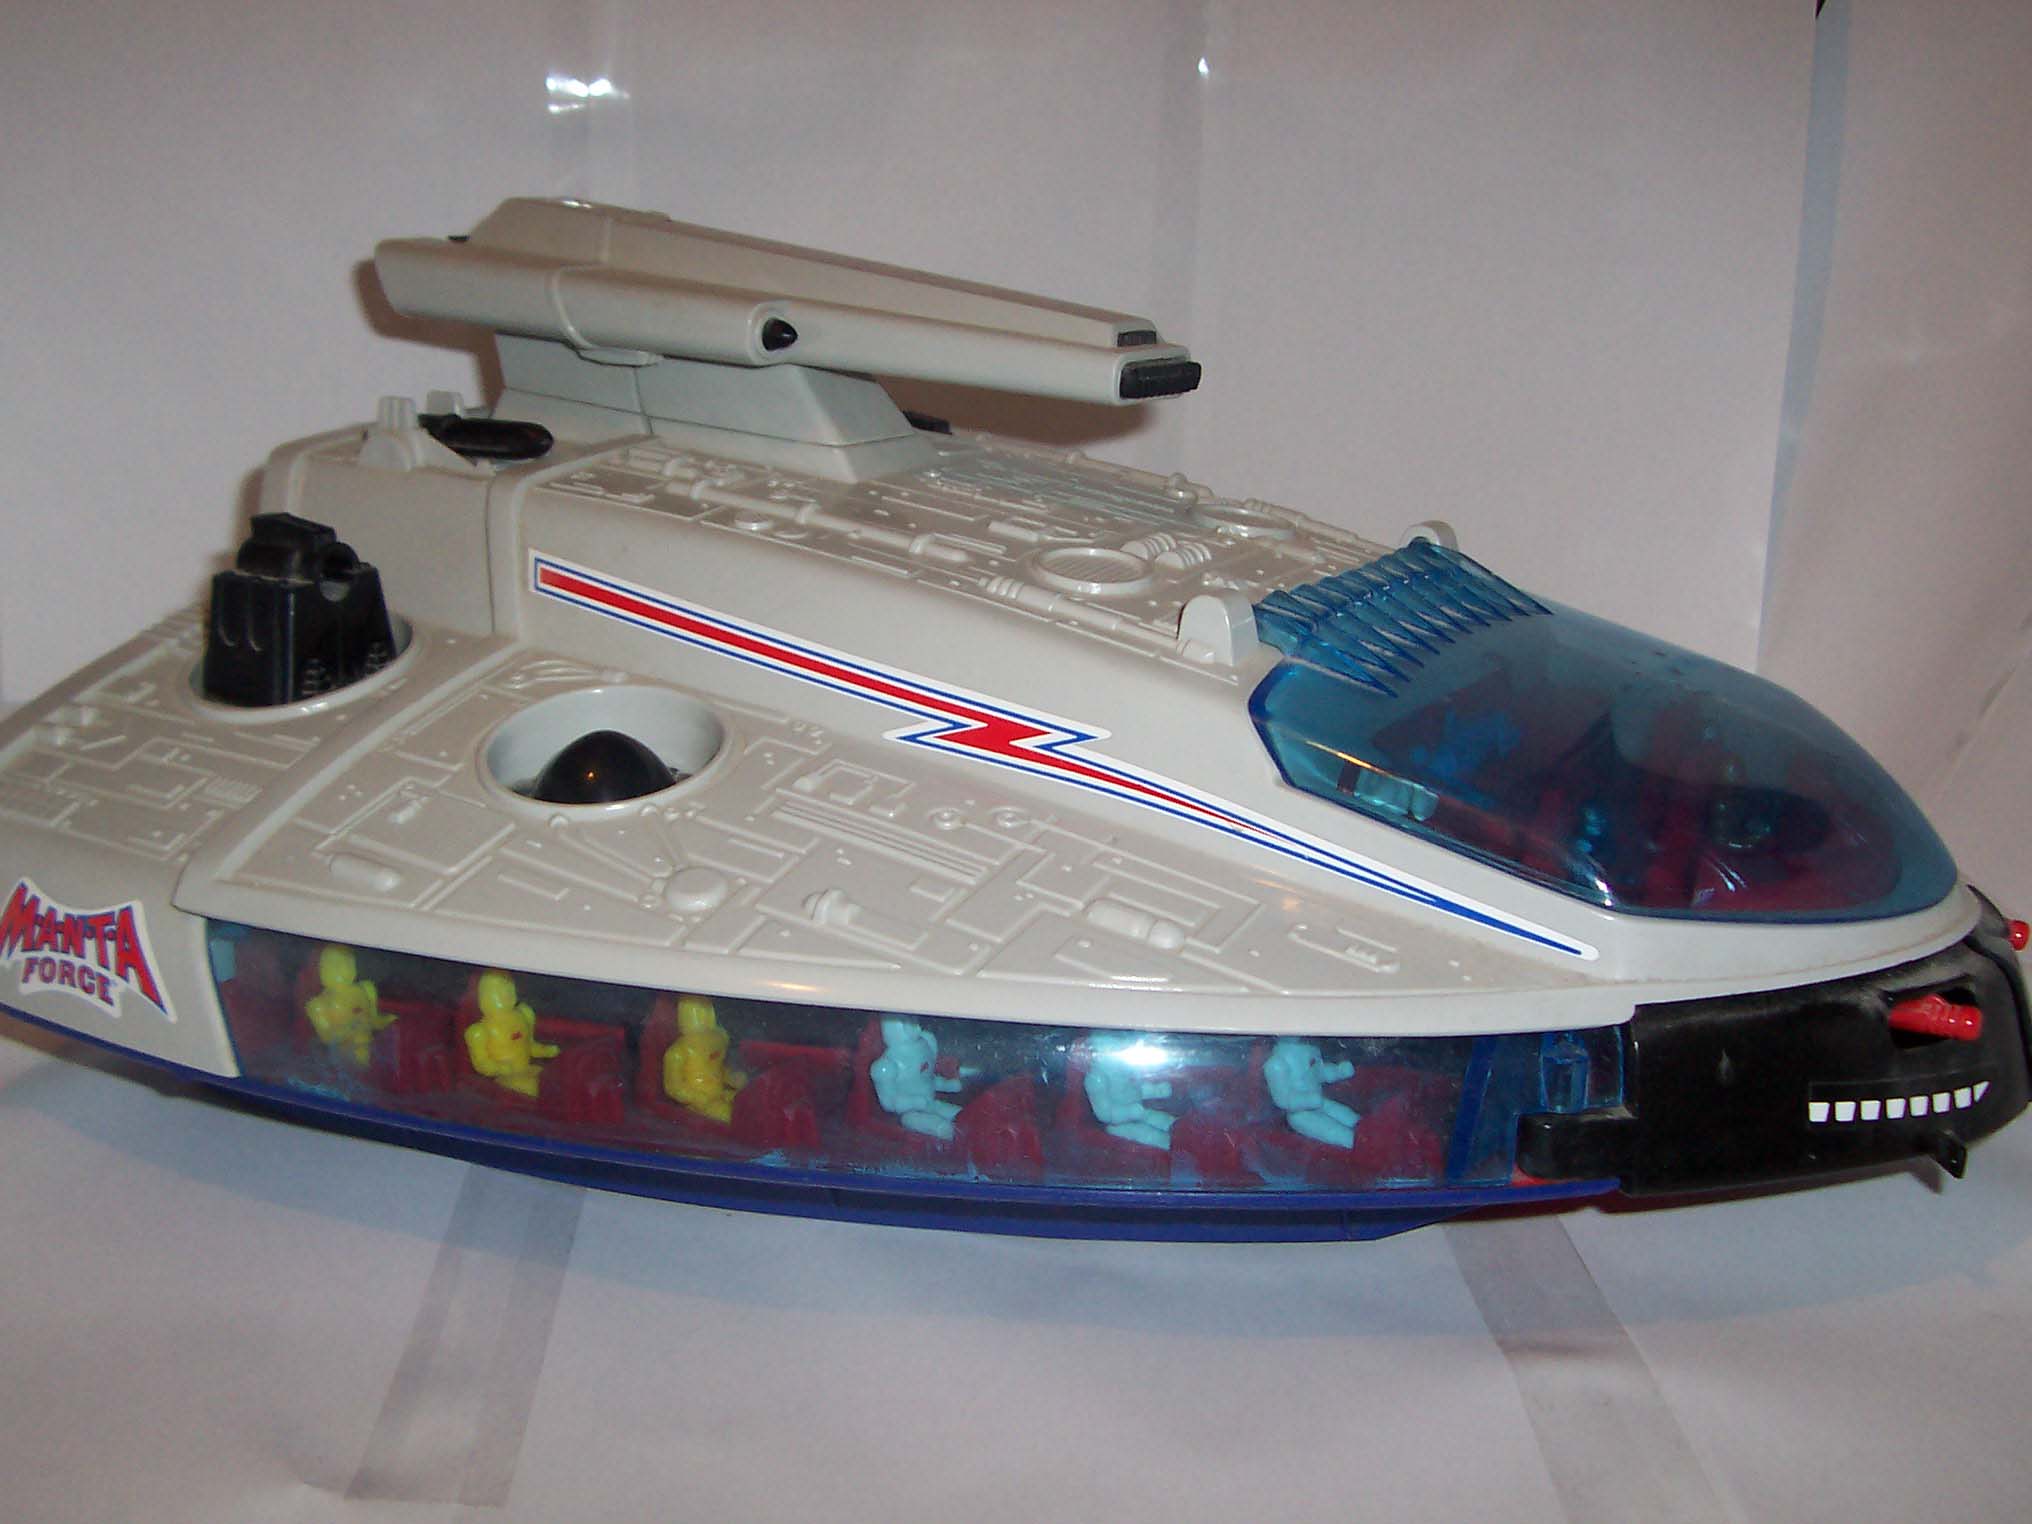 spaceship toys from the 80's